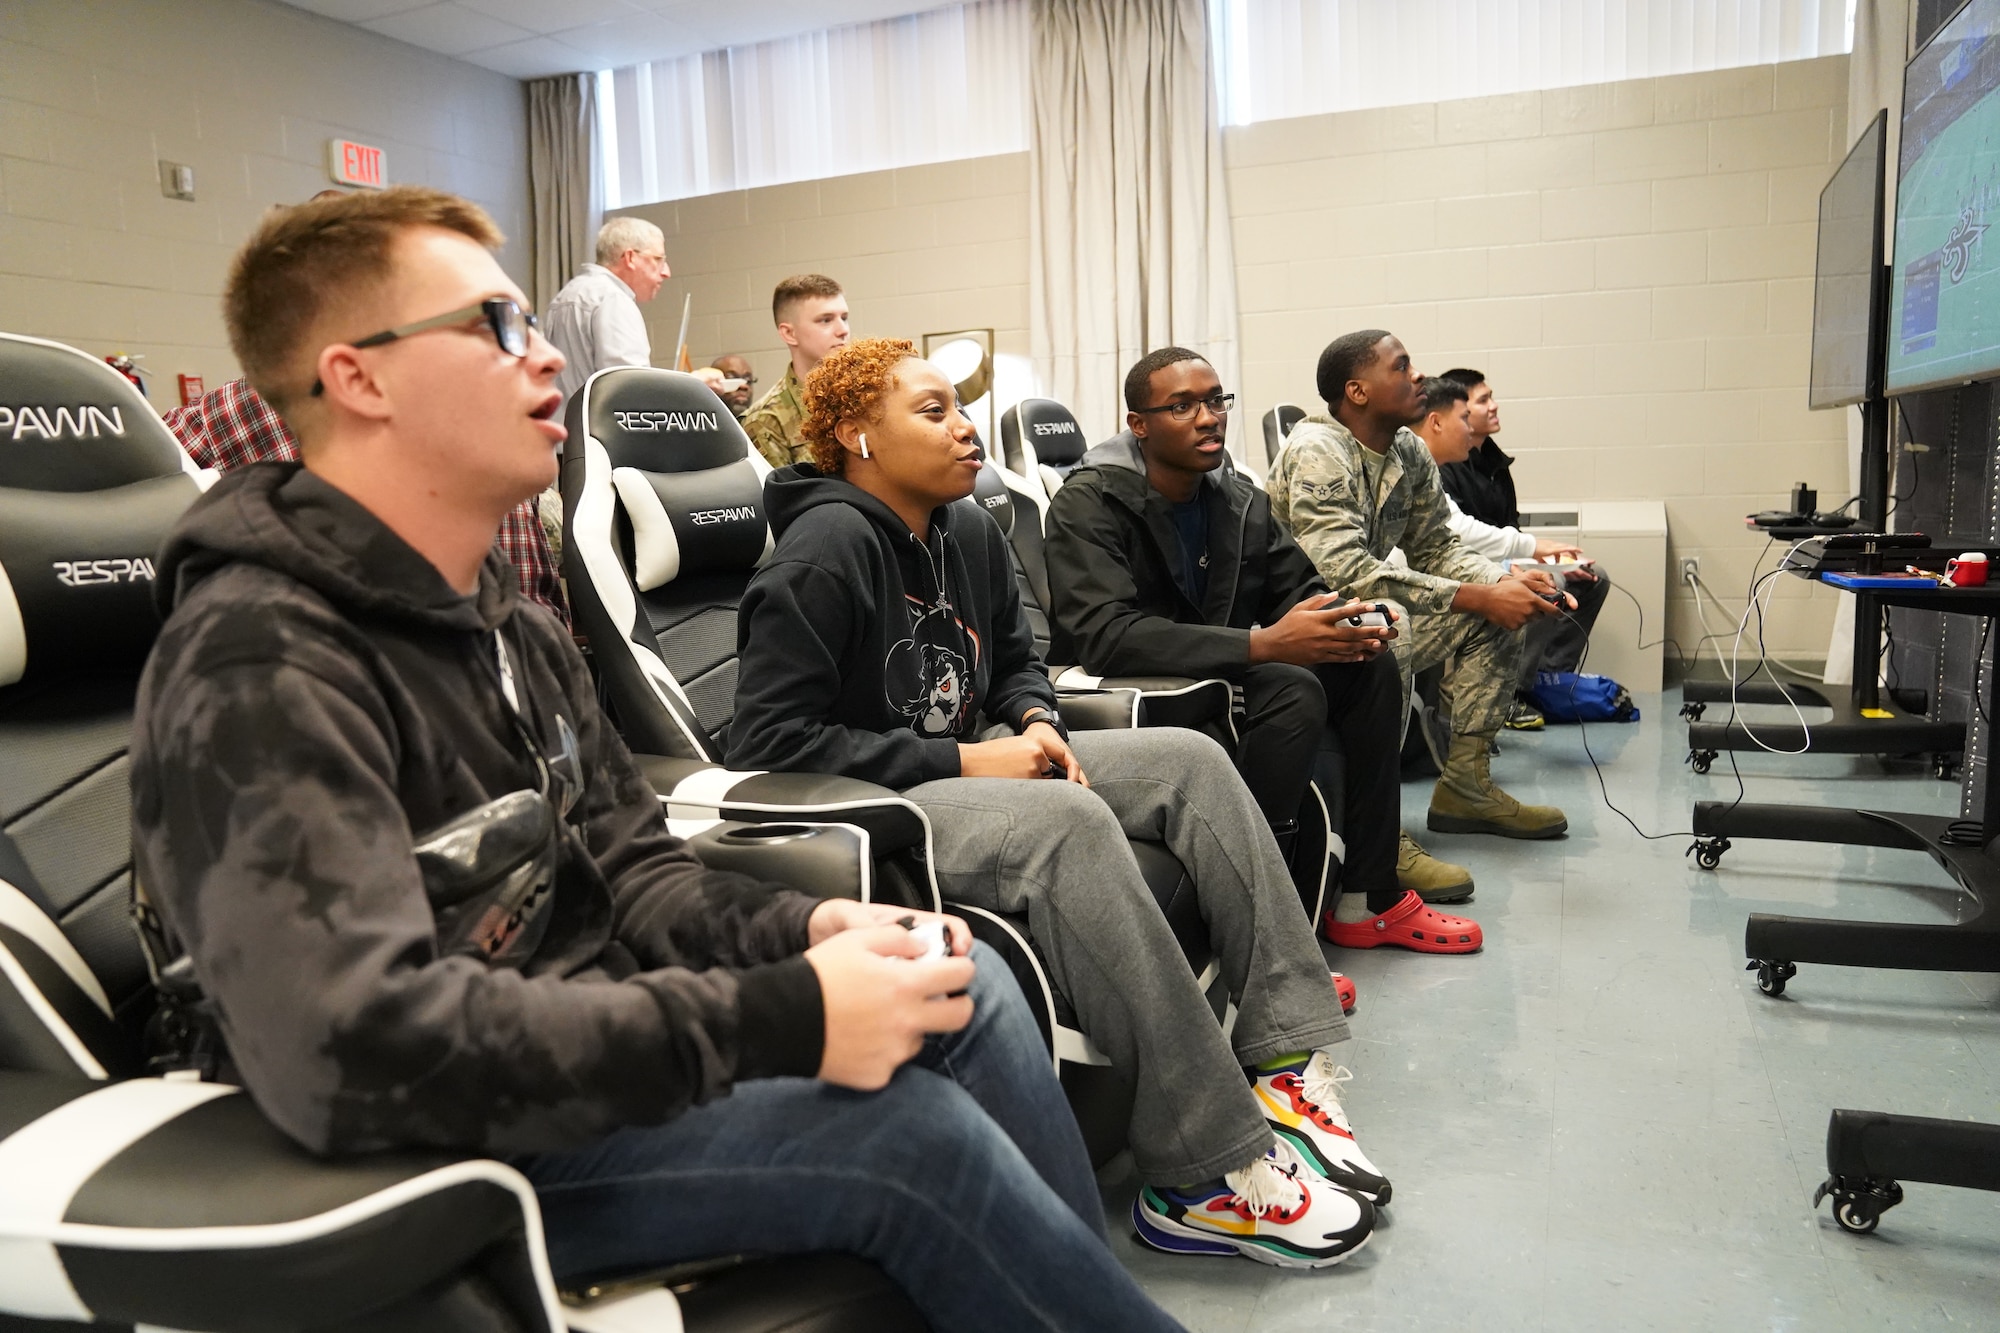 Keesler Airmen play video games during the opening of The Lighthouse inside the Larcher Chapel at Keesler Air Force Base, Mississippi, Nov. 1, 2019. The Lighthouse is a place dedicated to permanent party Airmen complete with gaming stations, massage chairs, a kitchen, and a music room. The idea of the lighthouse stemmed from a meeting Col. Heather Blackwell, 81st Training Wing commander, had with some of Keesler's dorm residents in August. (U.S Air Force photo by Airman 1st Class Spencer Tobler)